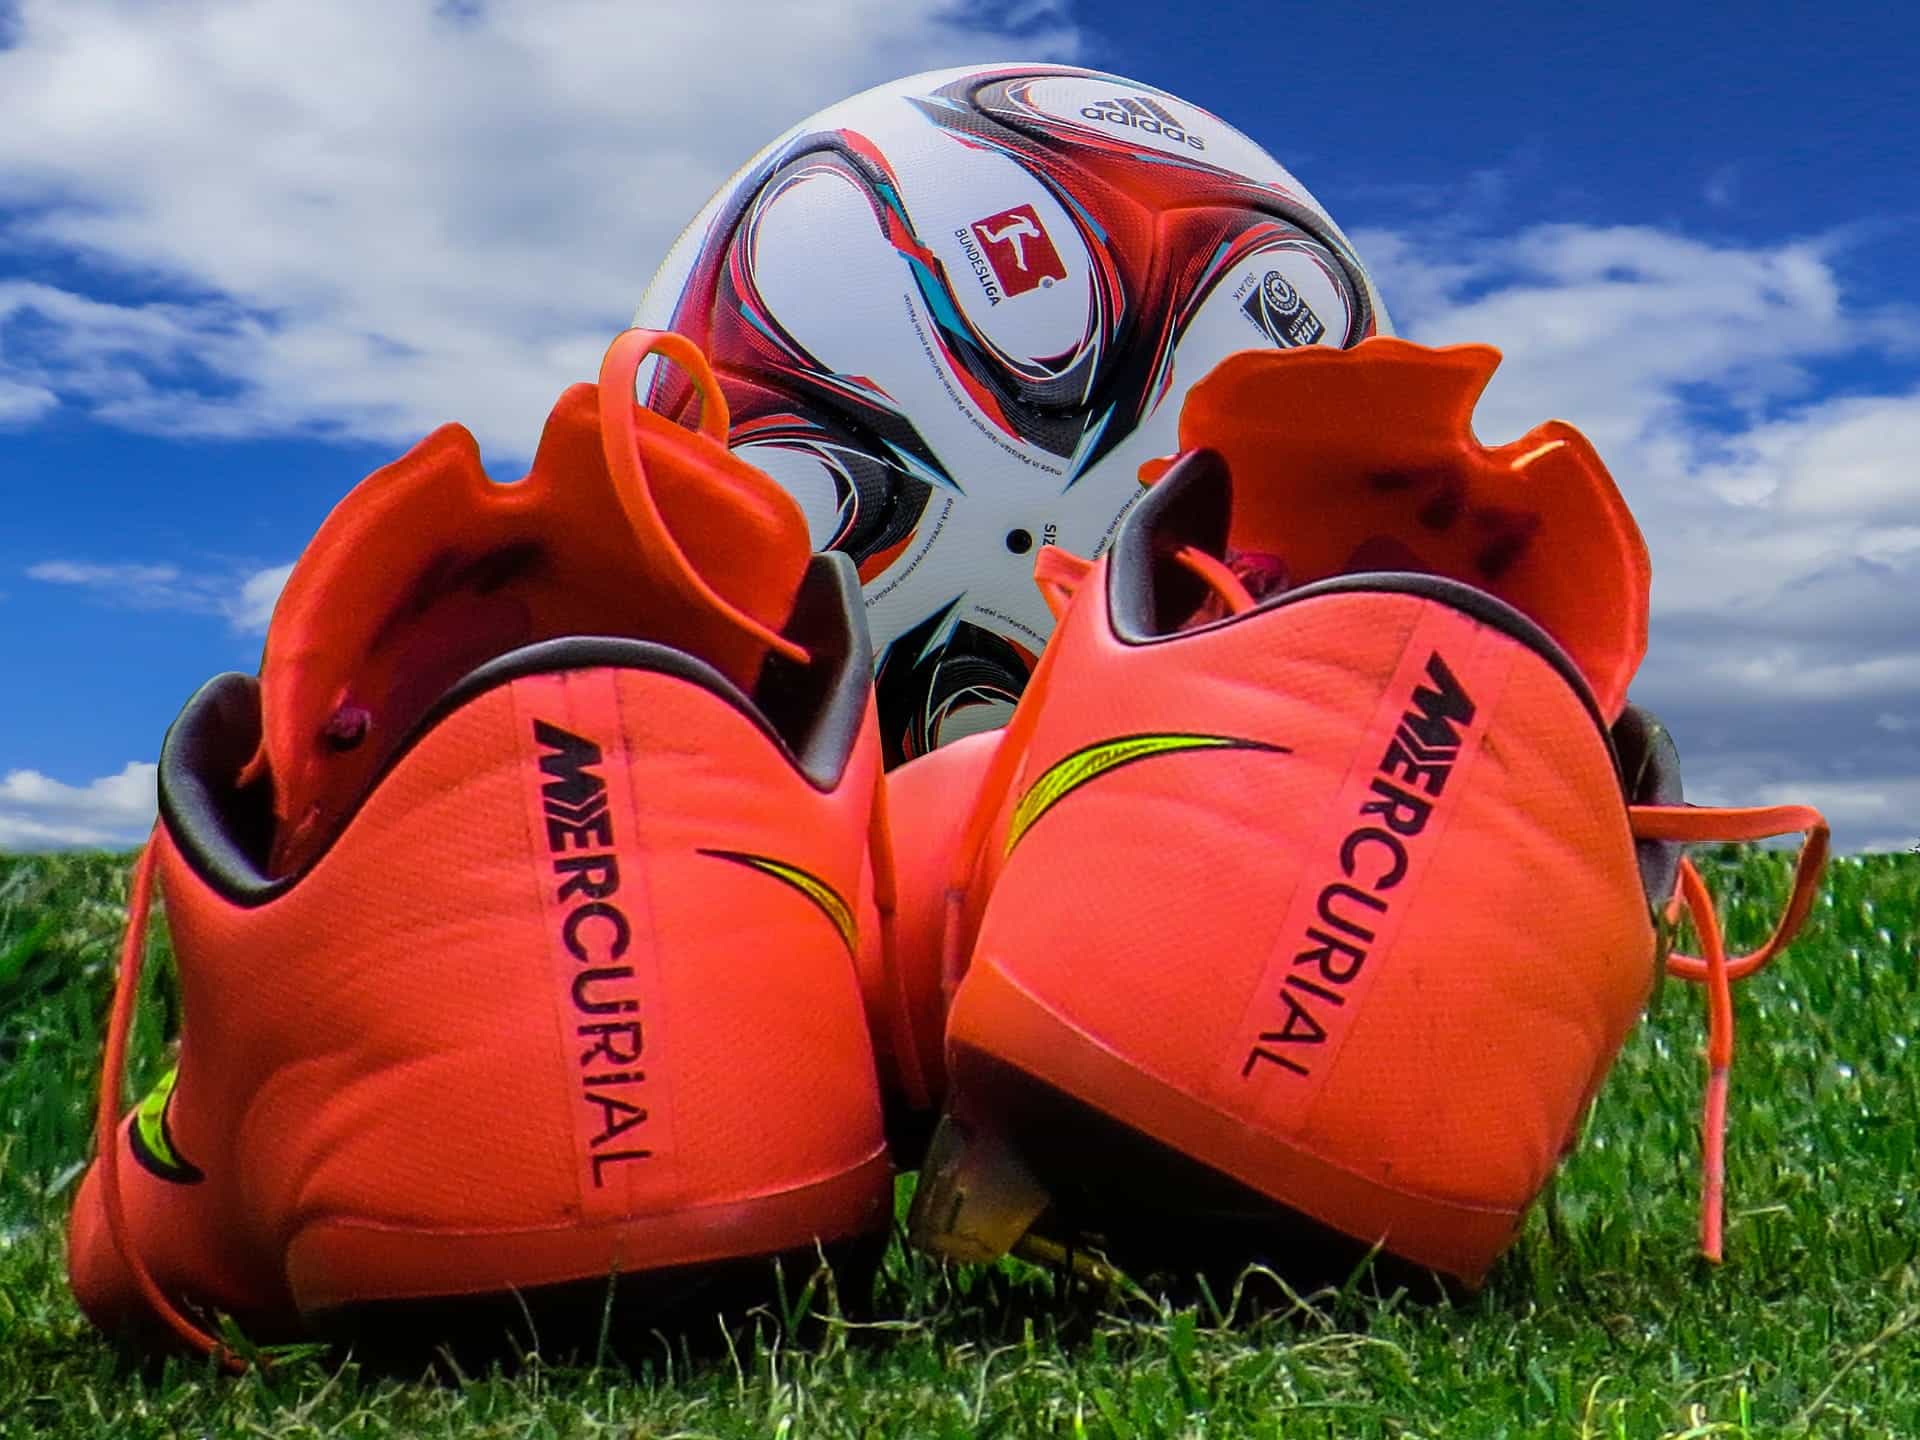 Orange football boots in the foreground with a football in the background